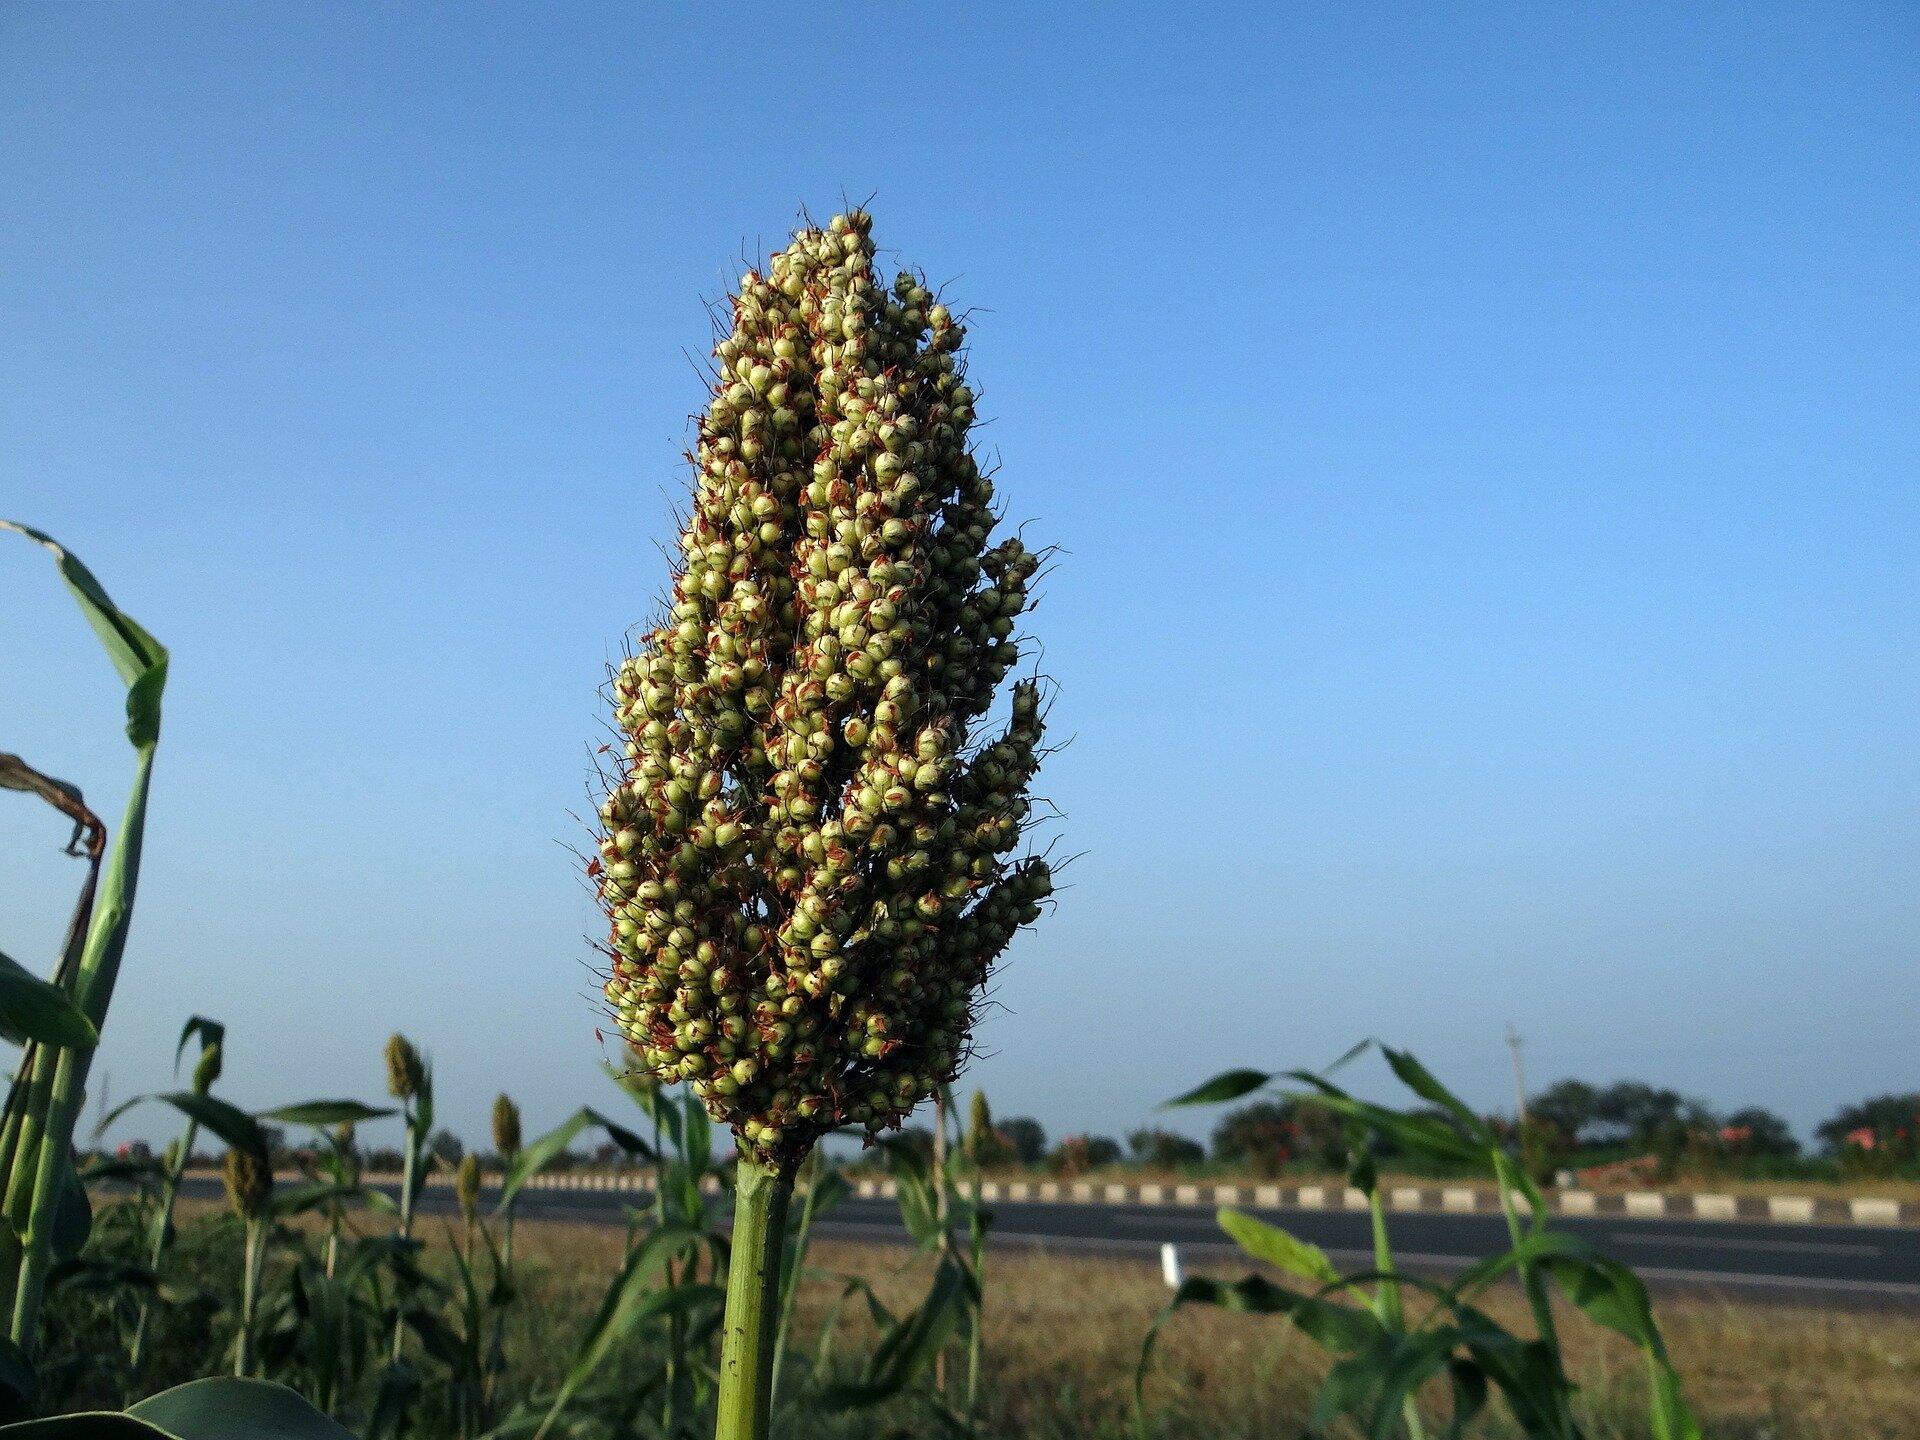 Bioenergy sorghum's roots can replenish carbon in soil